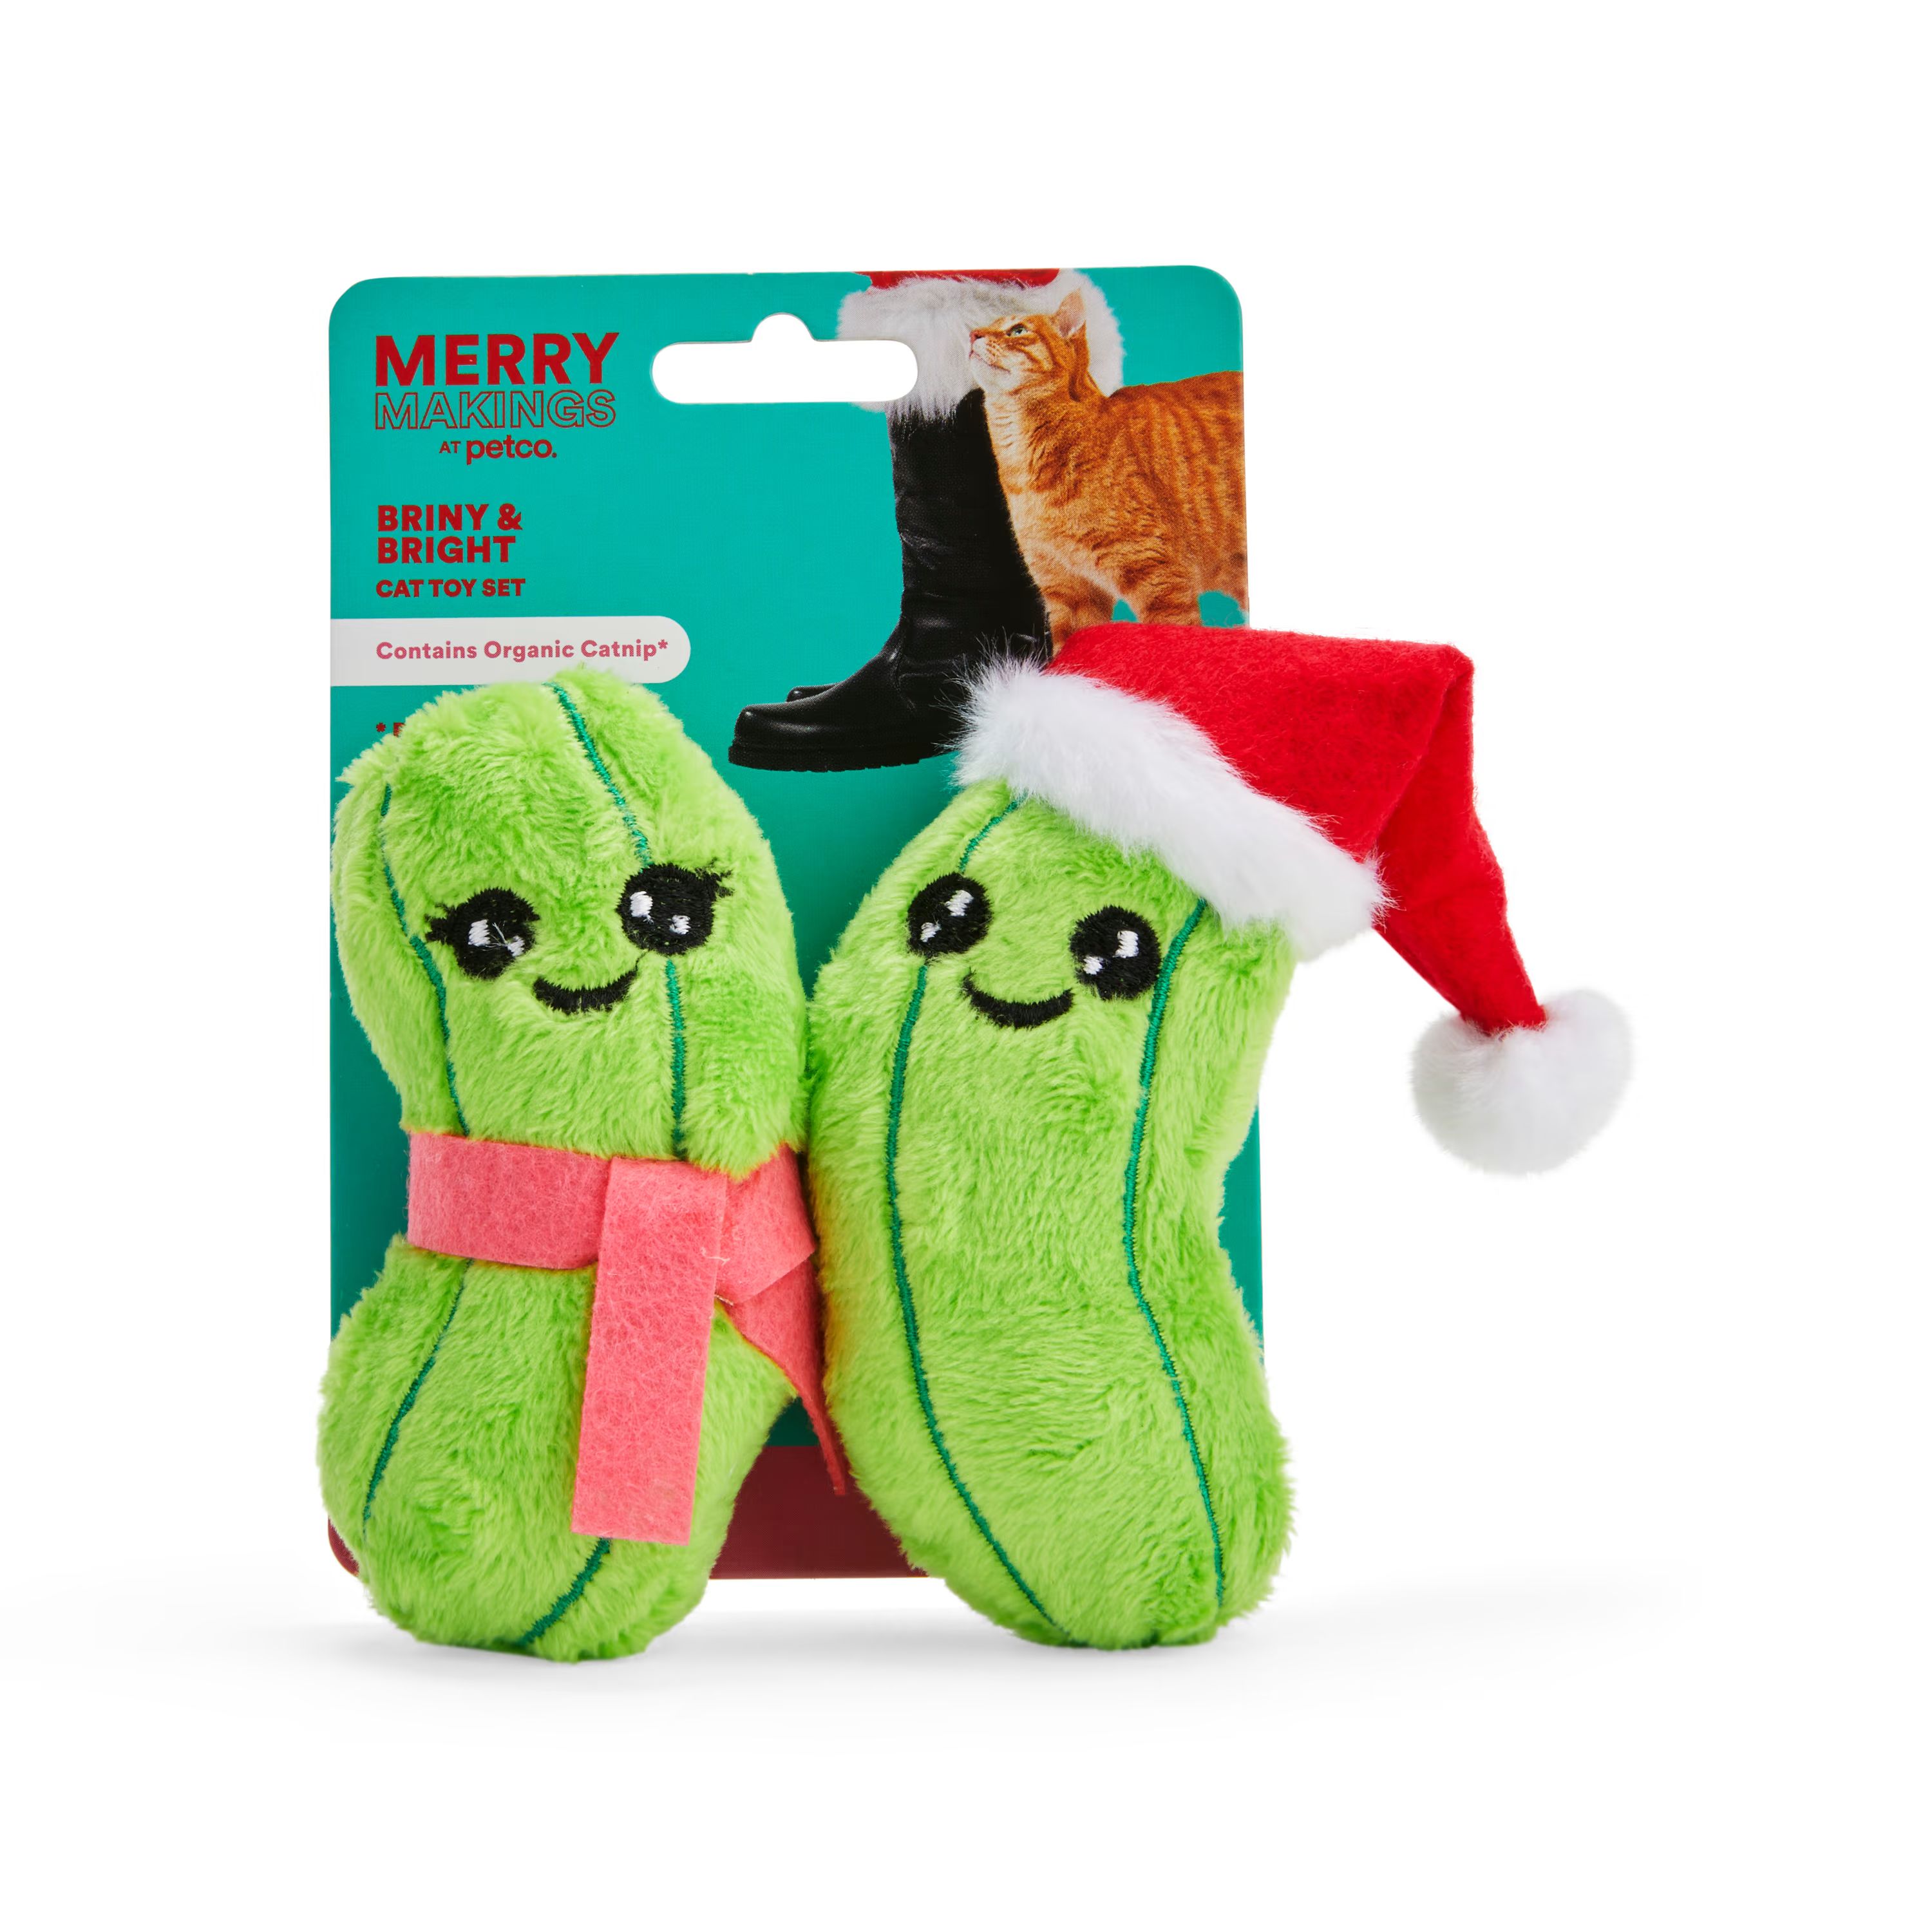 Merry Makings Briny & Bright Plush Pickles Cat Toy Set, X-Small, Pack of 2 | Petco